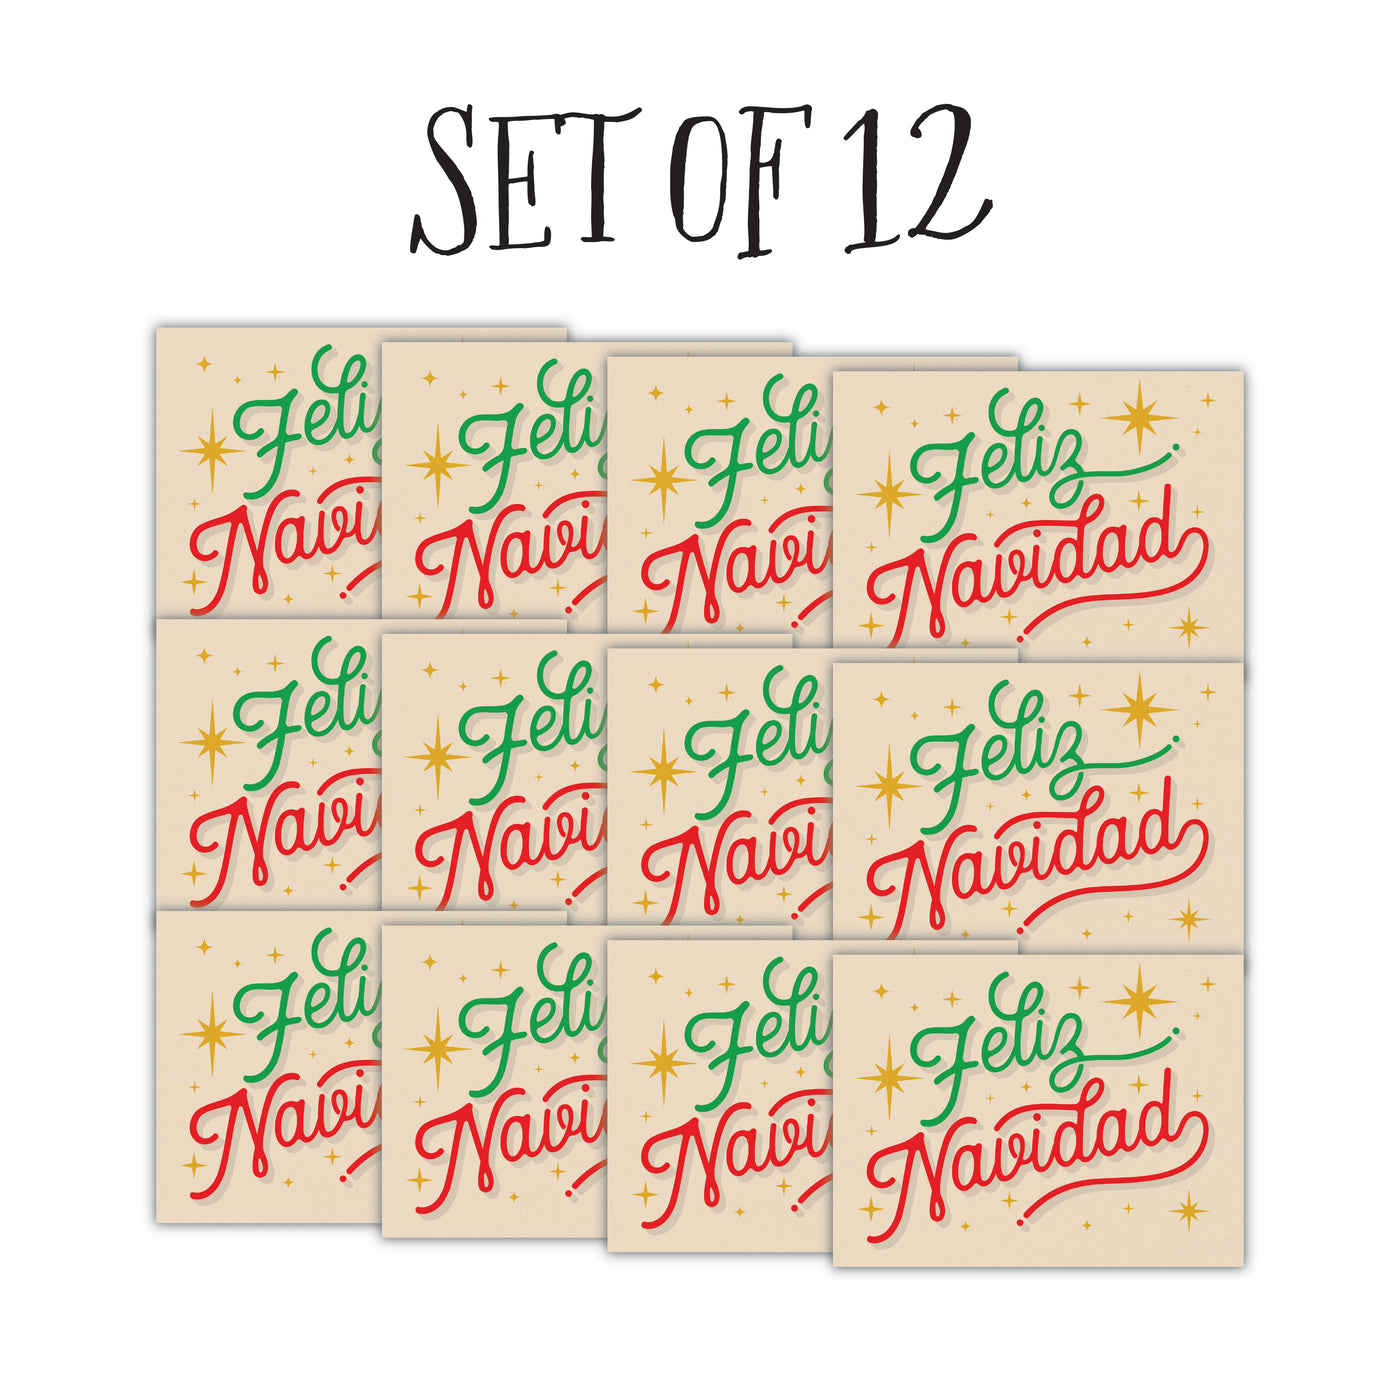 Front of 12 greeting cards with beige background, gold stars, red & green text that reads "Feliz Navidad"